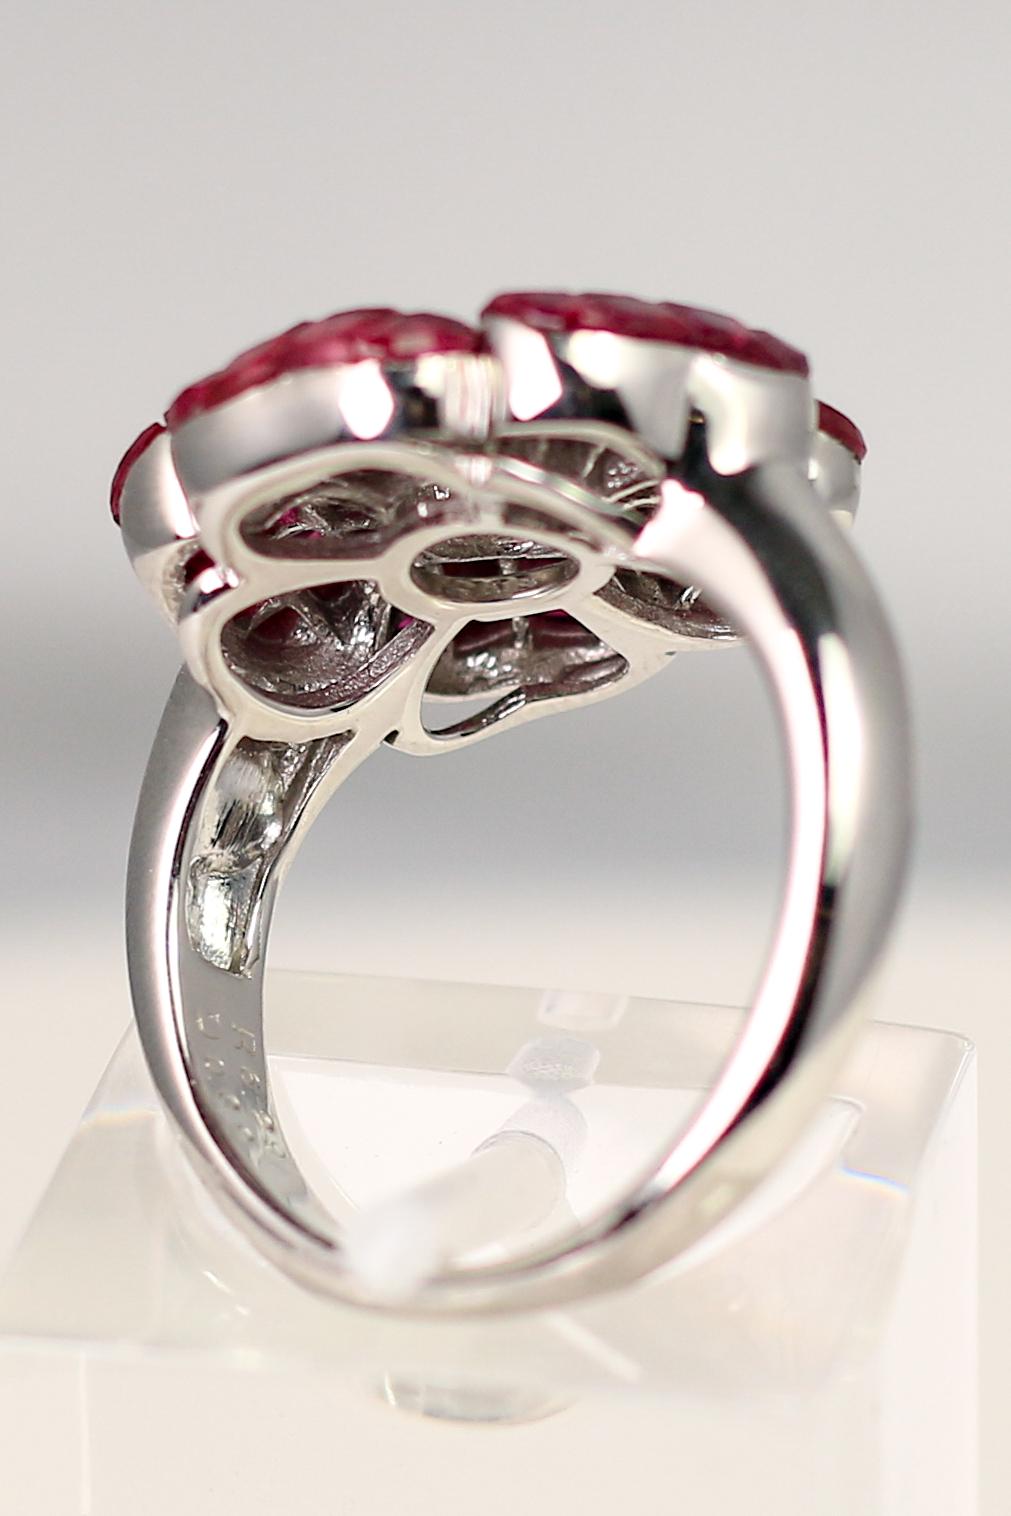 This flower ring, of 18k White Gold with 6.29cts of invisibly set Rubies and sparkling Diamonds is sure to be a stunning addition to any fun, fragrant, floral ensemble. The perfect piece to gift for that special someone, or yourself. The ring is